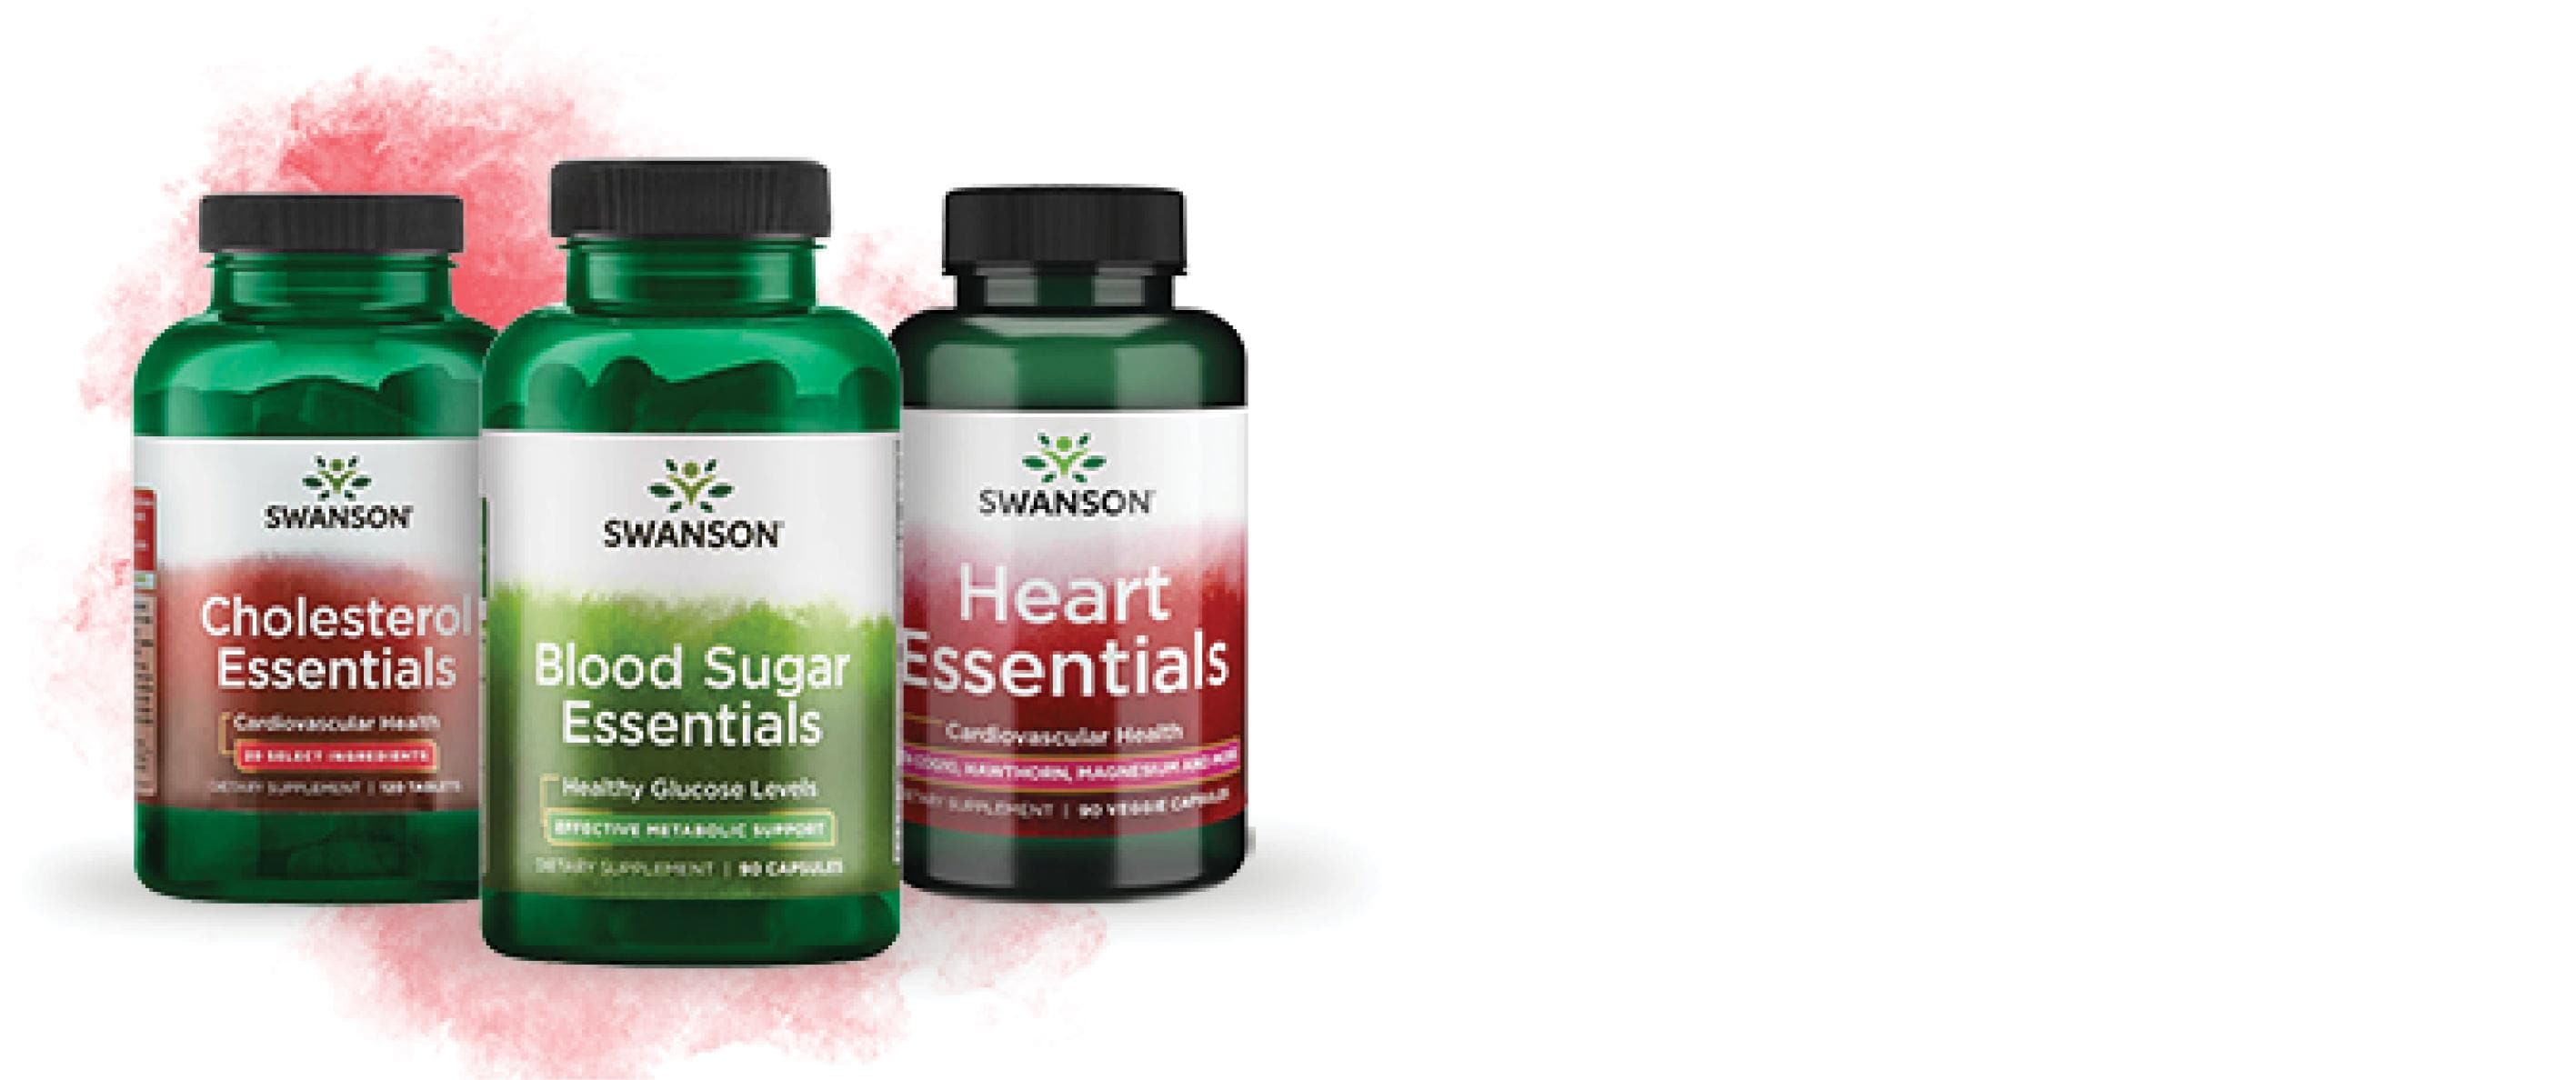 Are You Heart Smart? Discover essential heart supporting blends